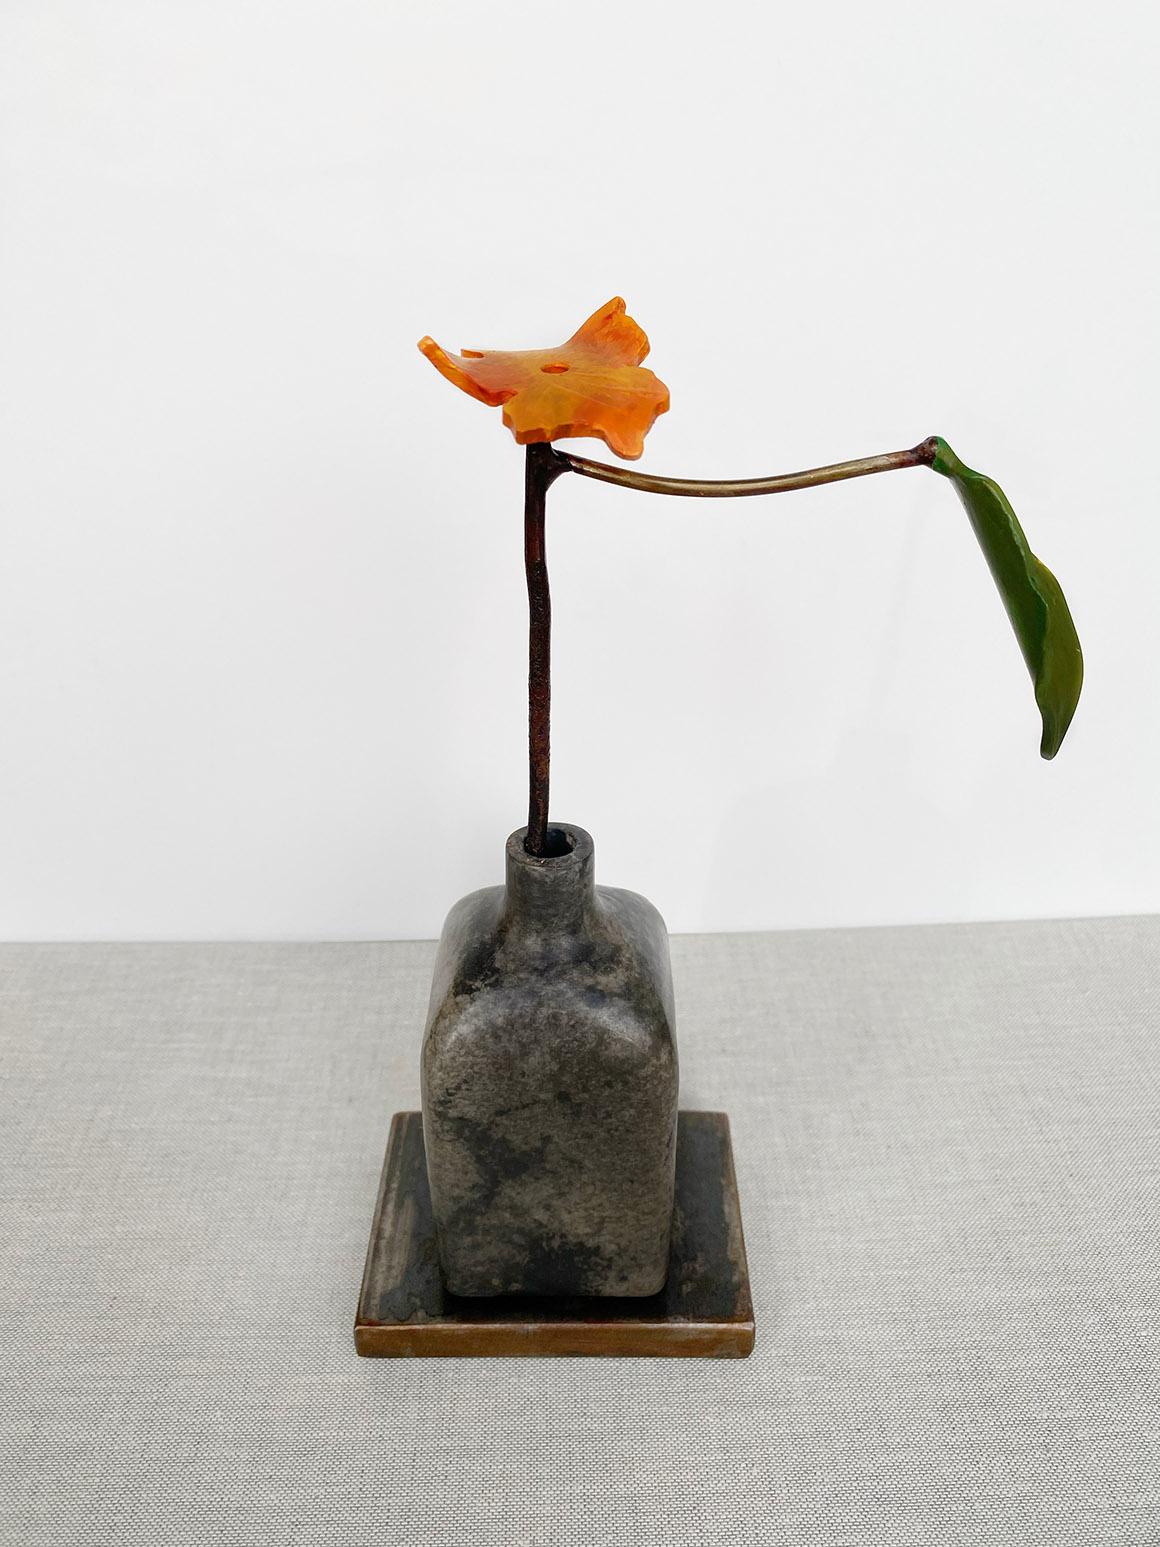 'Persimmon' by David Kimball Anderson, 2020. Bronze, steel, and paint, 10 x 4 x 3 in. This sculpture features a round vase cast in bronze and finished in varying patinas of light and dark gray. The flower is in a bright color of orange and 1 green